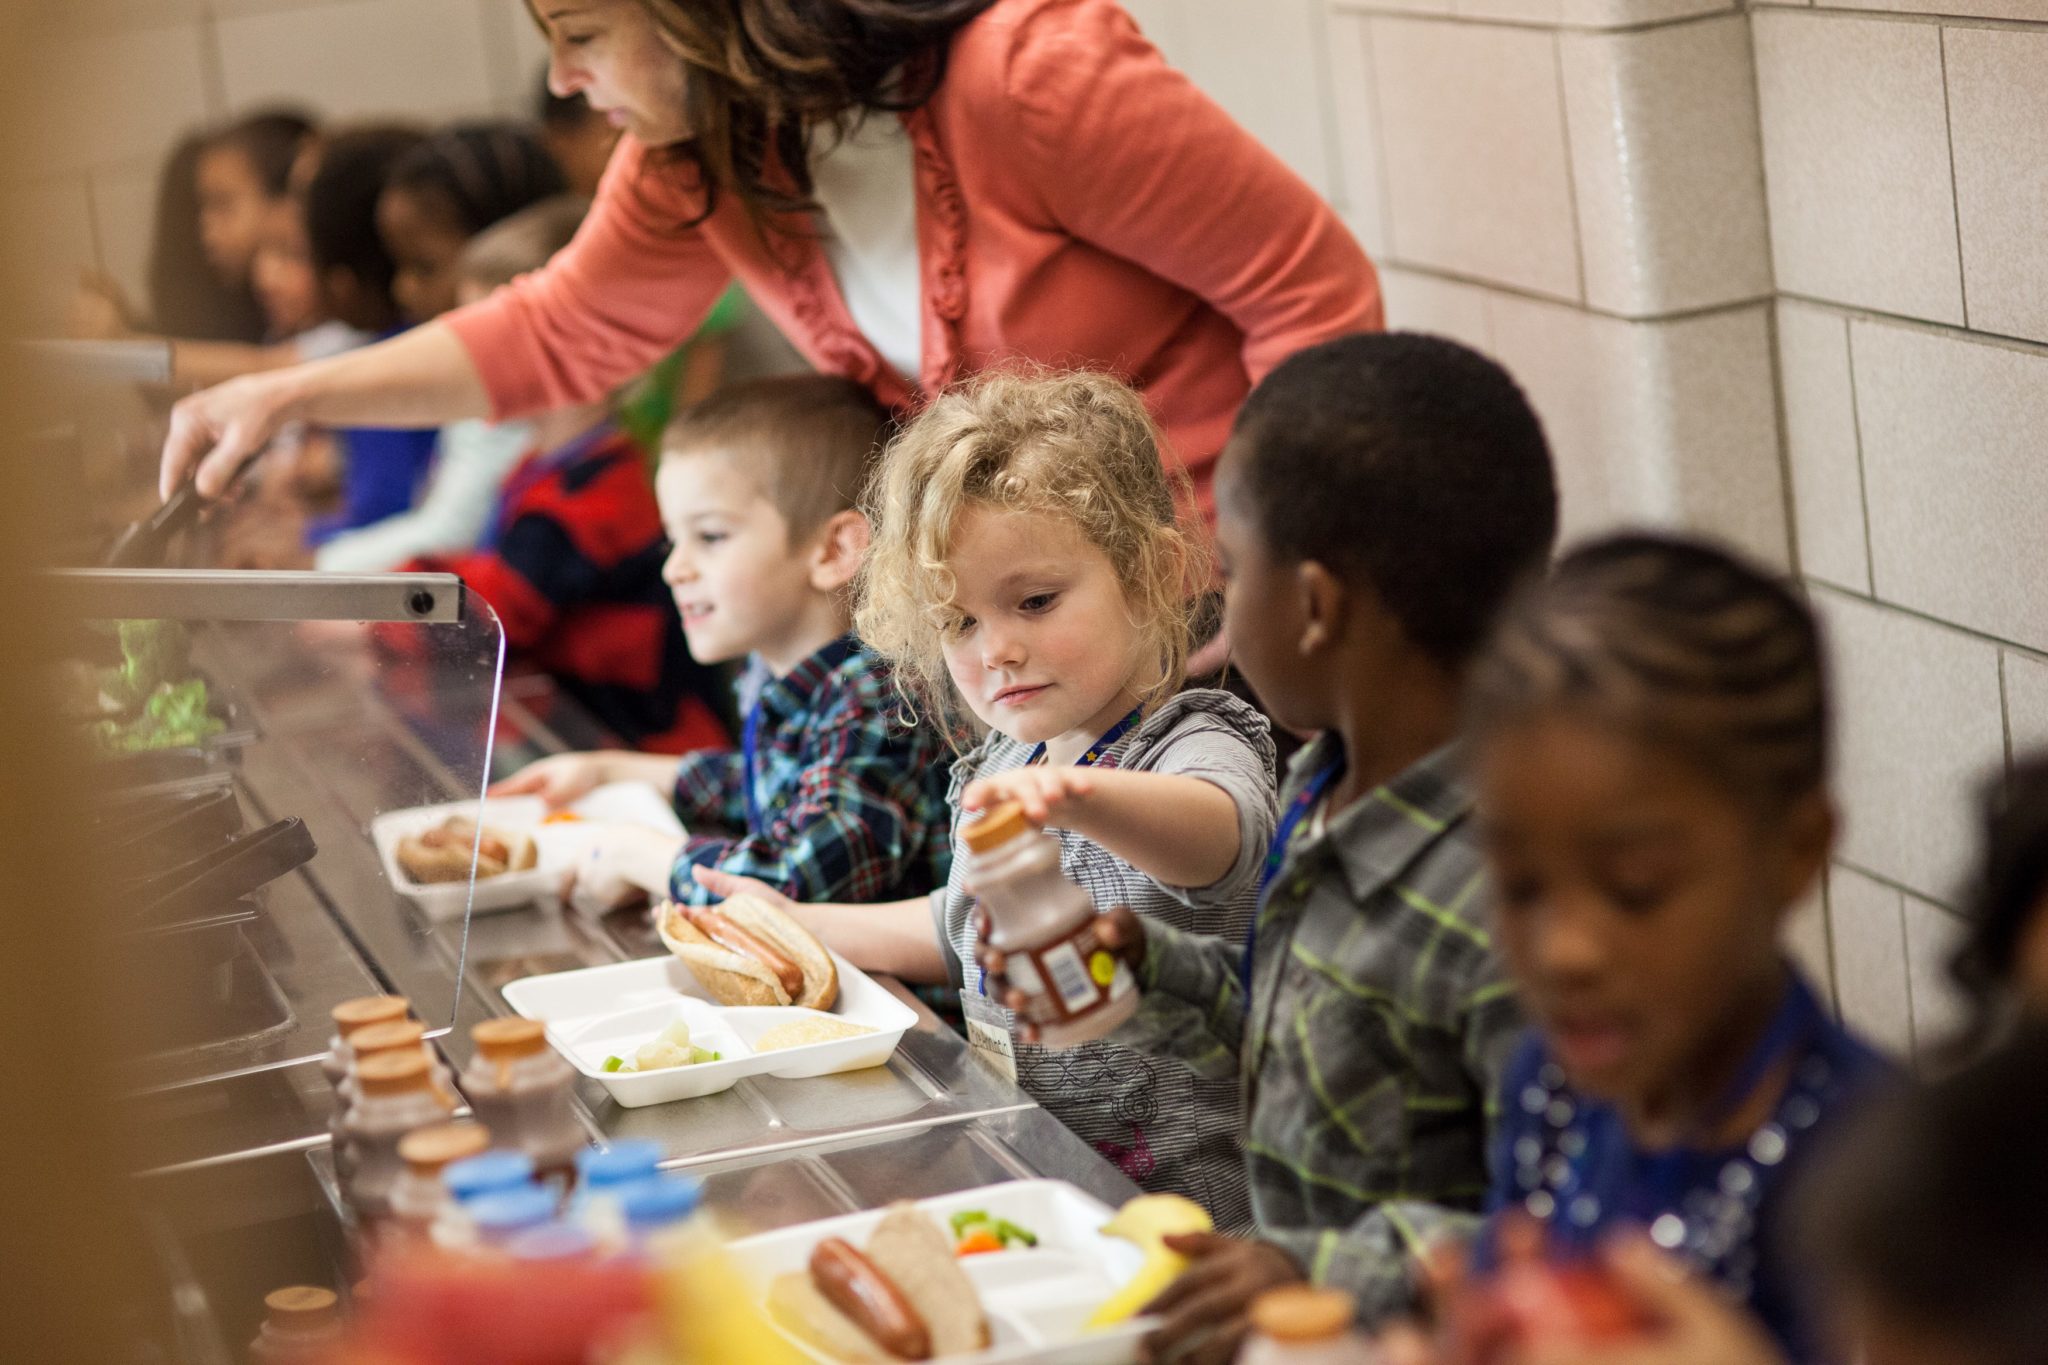 Every five years, Congress must reauthorize domestic child nutrition programs. Photo: Joe Molieri / Bread for the World